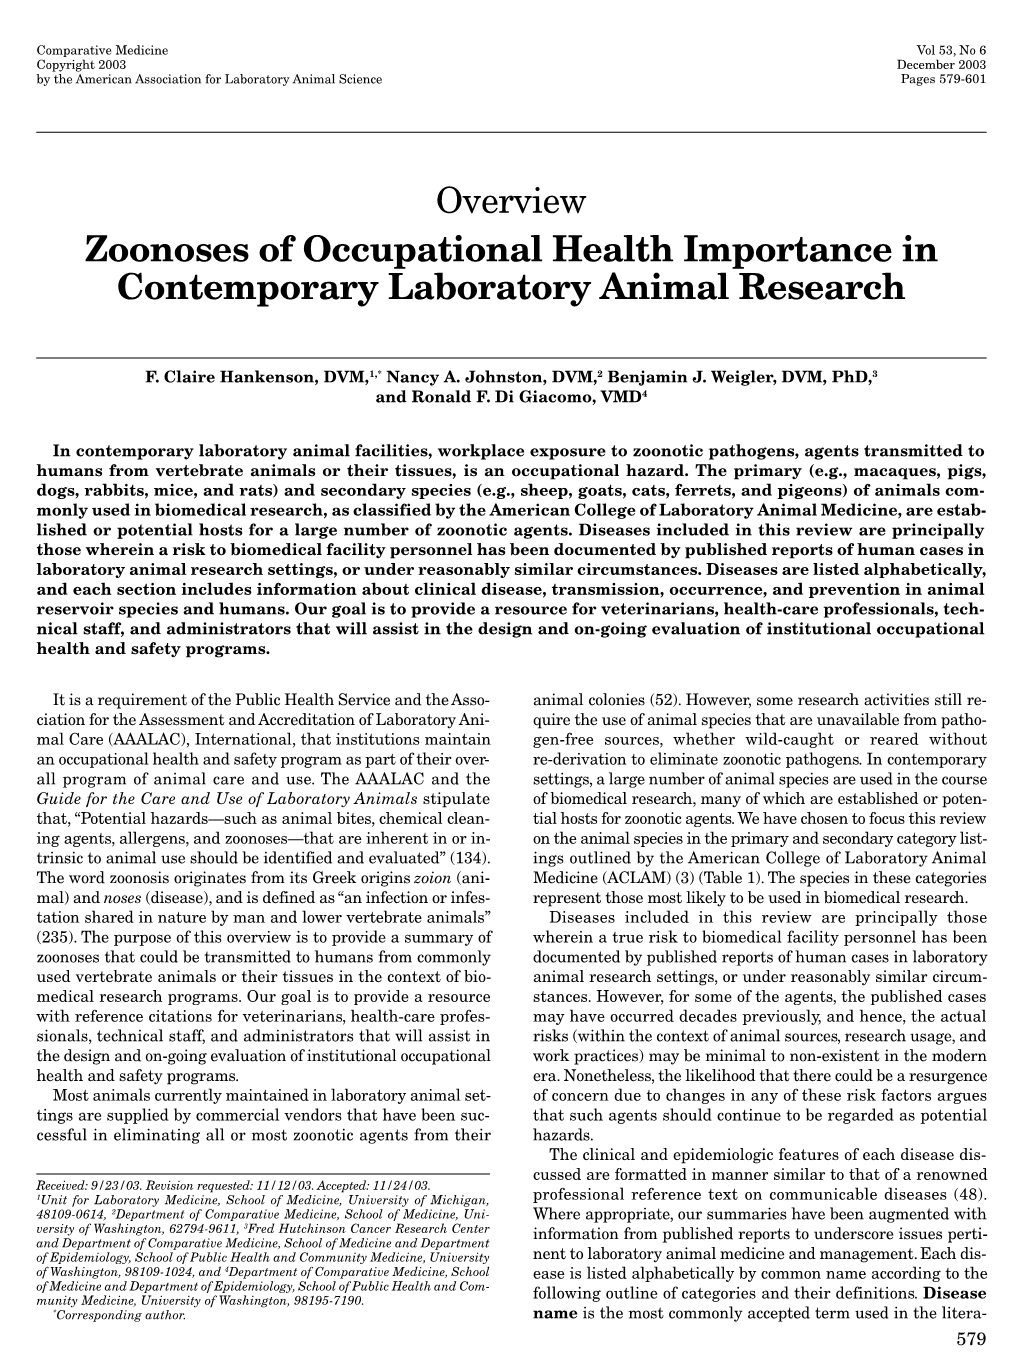 Overview Zoonoses of Occupational Health Importance in Contemporary Laboratory Animal Research